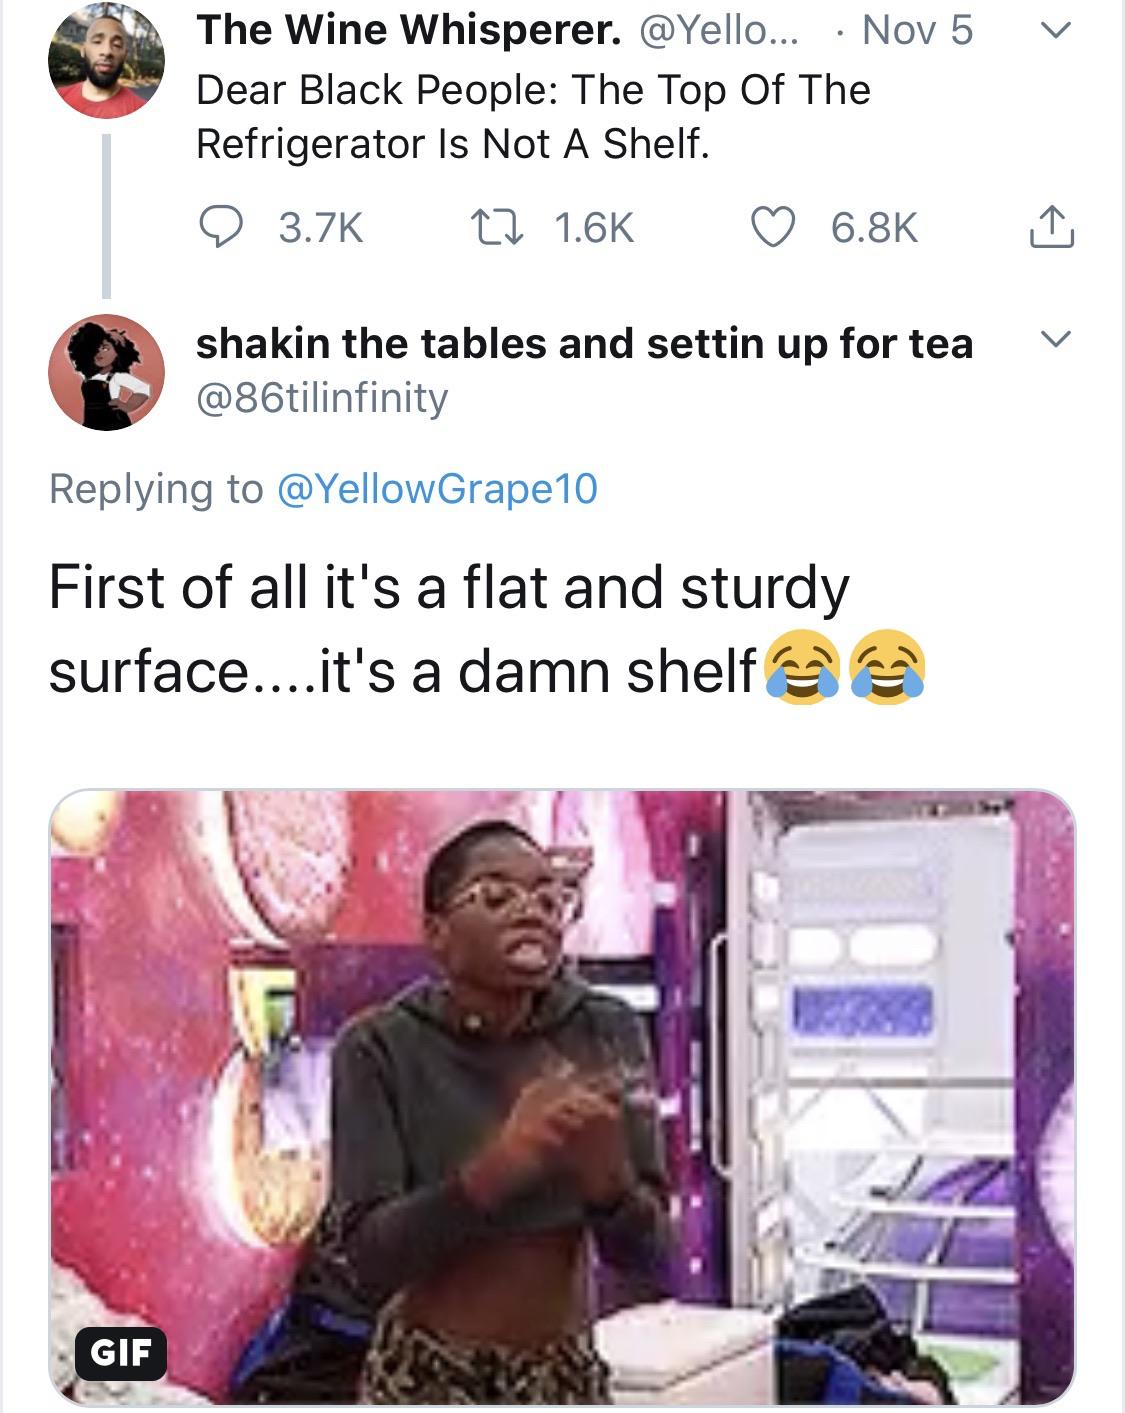 funny patagonia tweets - v The Wine Whisperer. ... Nov 5 Dear Black People The Top Of The Refrigerator Is Not A Shelf. D 22 shakin the tables and settin up for tea First of all it's a flat and sturdy surface....it's a damn shelf Gif